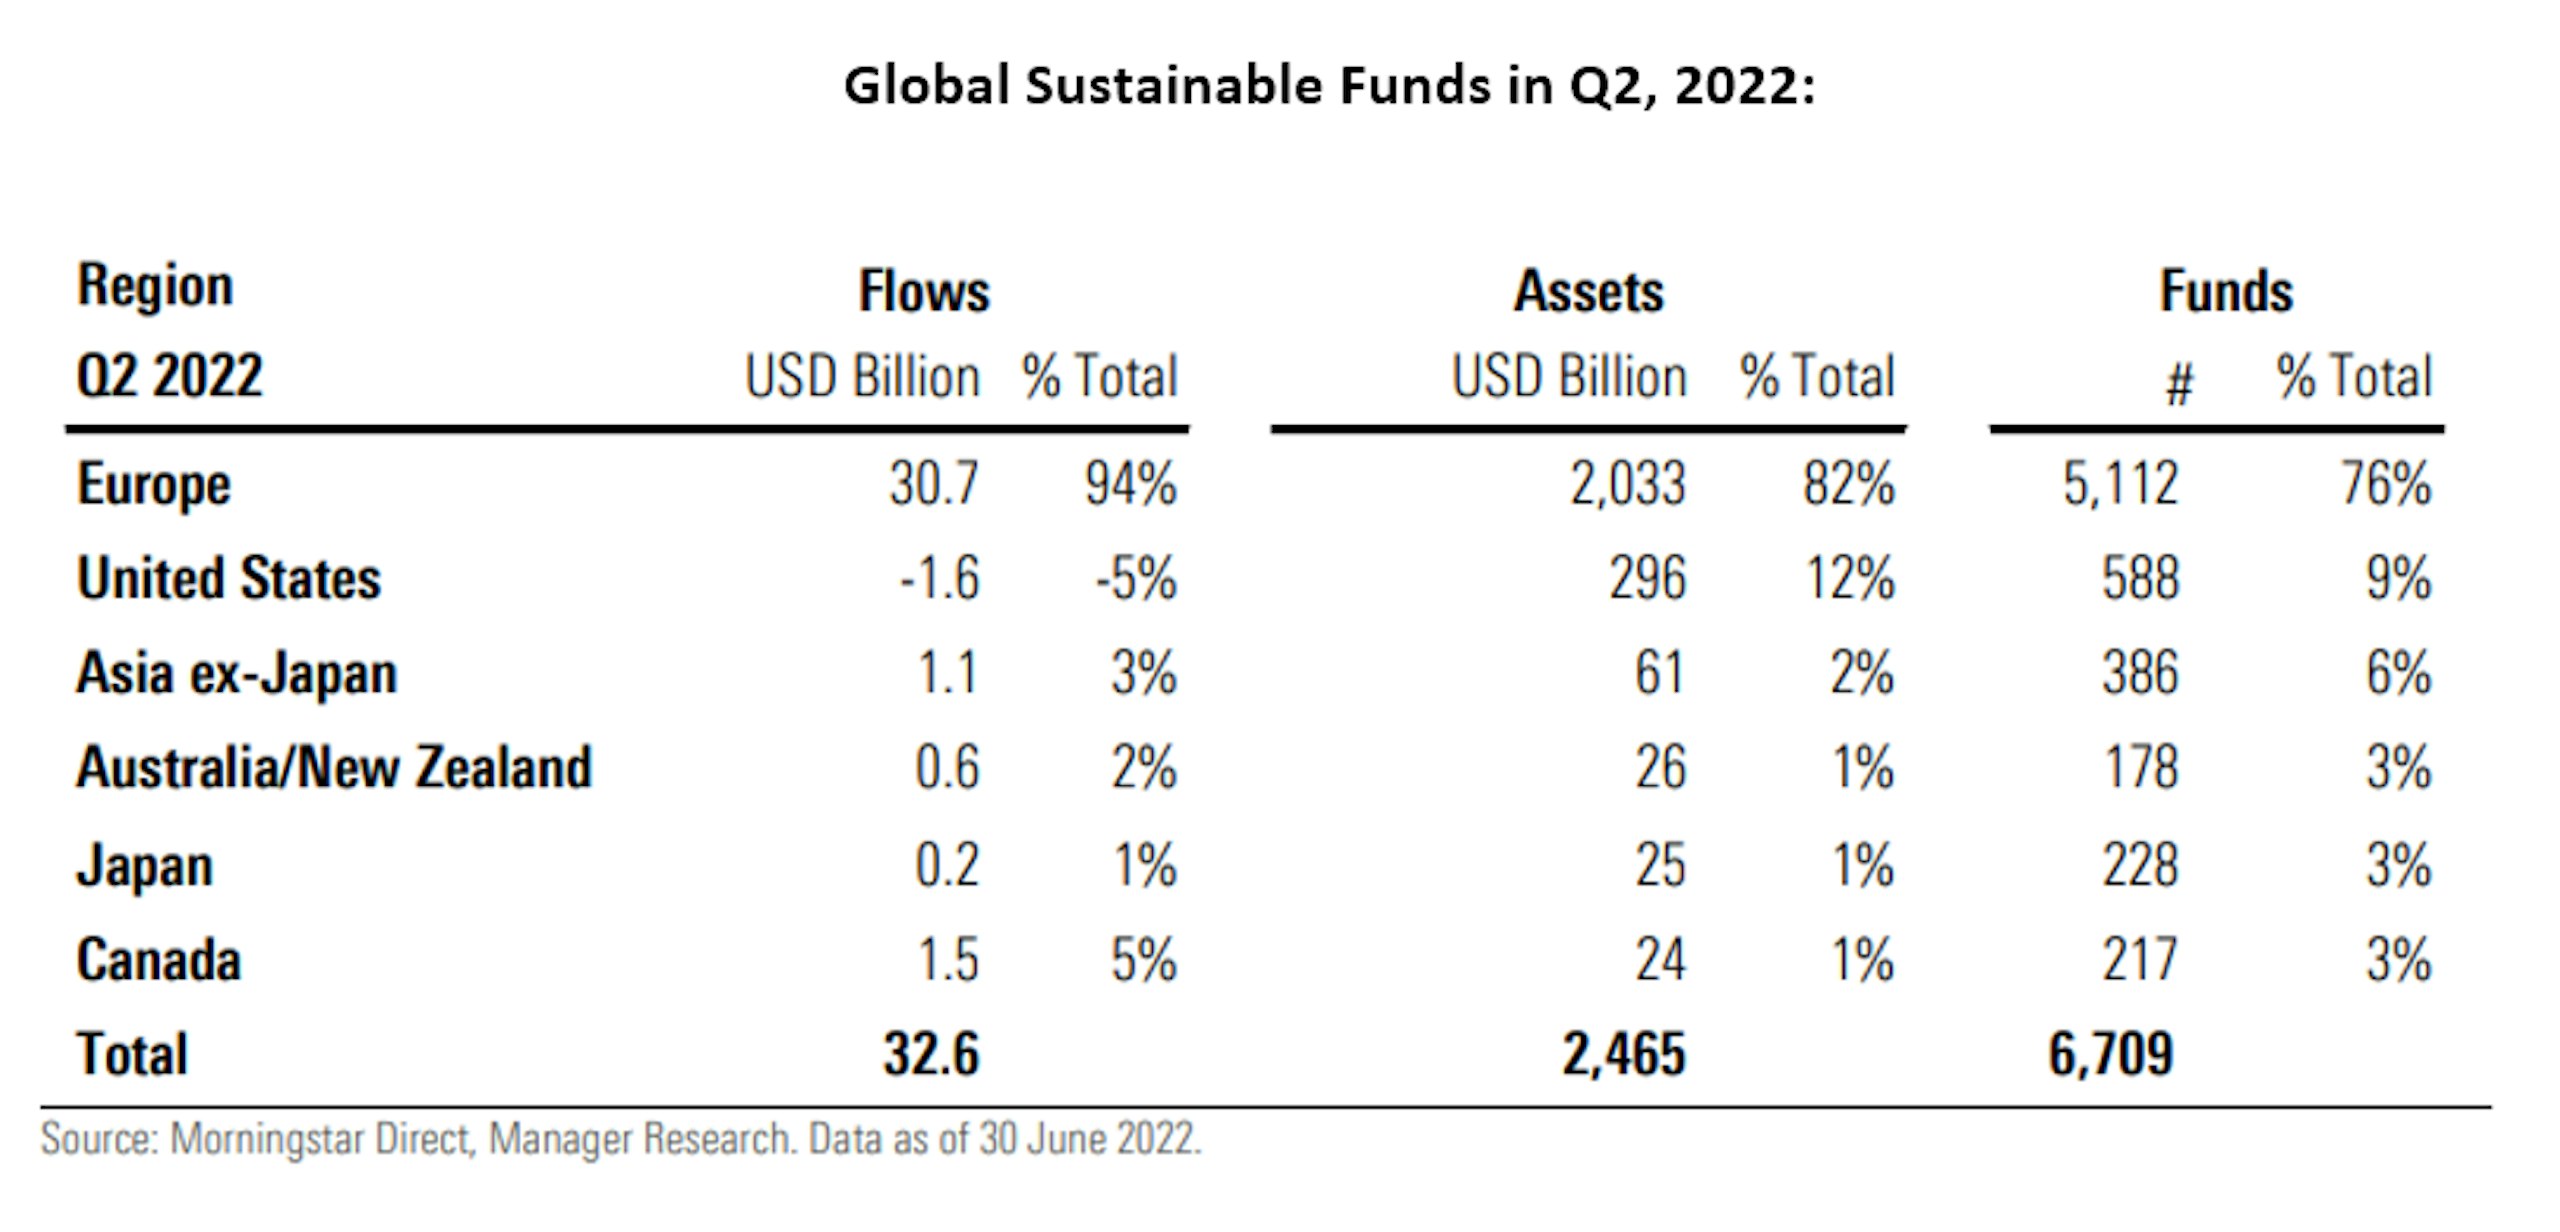 Global Sustainable Funds in Q2, 2022: